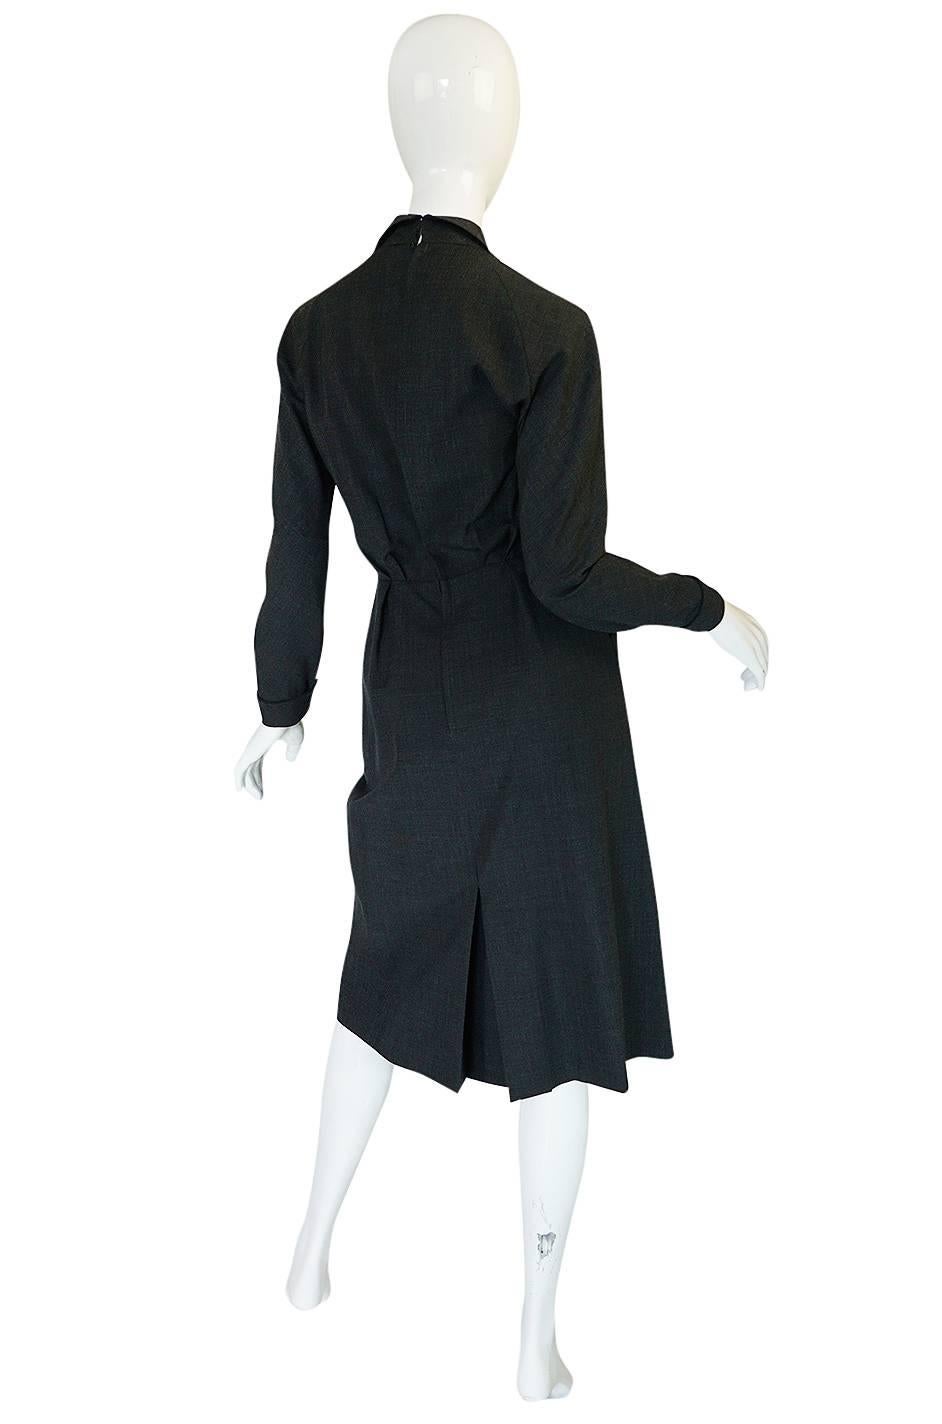 This wonderful tailored and chic dress is labeled Christian Dior Original and pieces form this time period with this label were almost always a custom or special order. This would have been based on the Dior Haute Couture collection designed by